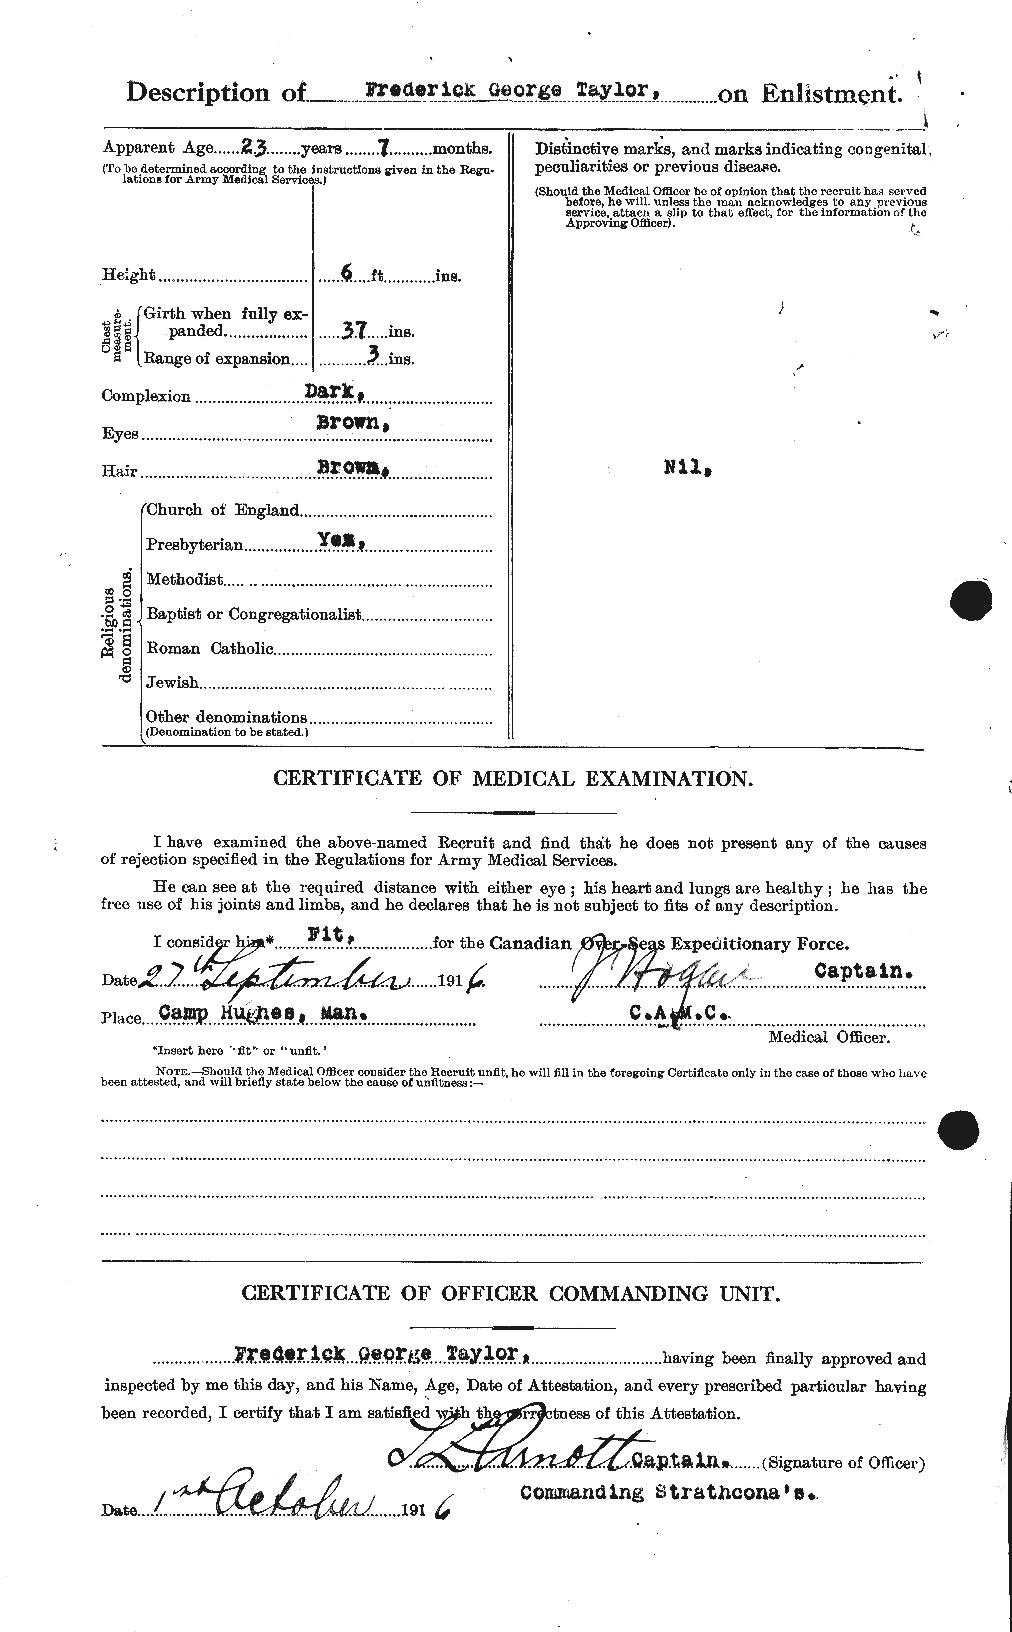 Personnel Records of the First World War - CEF 625800b